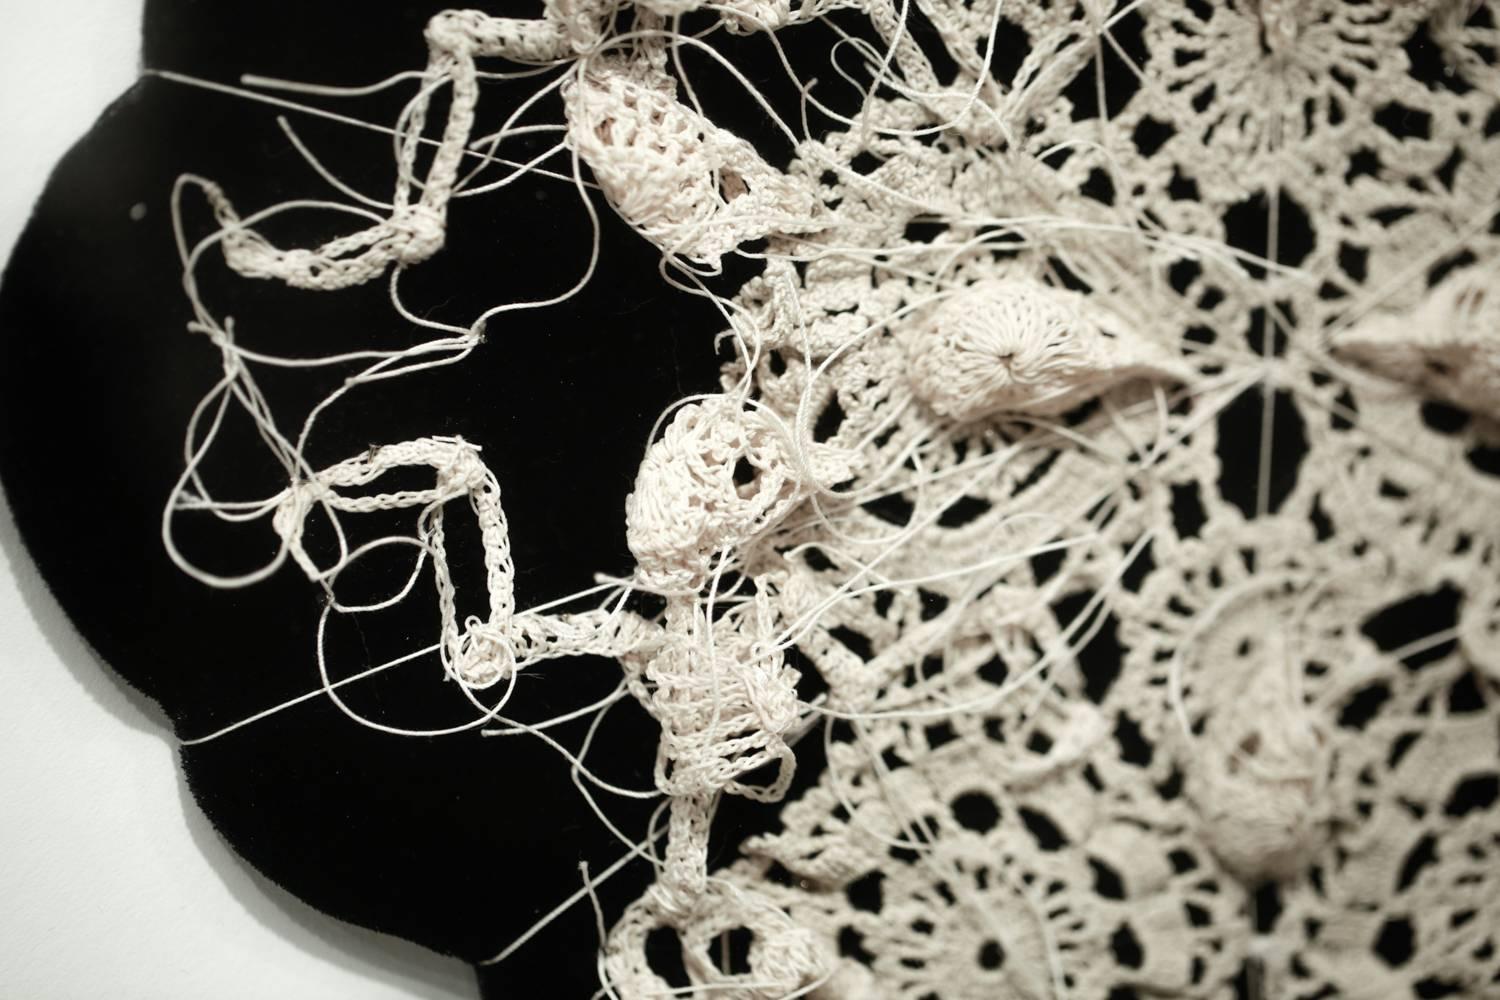 "Withermore" is an original crocheted sculptural work by Caitlin McCormack made of stiffened cotton string, antique remnant, steel pins, and velvet. The piece ships in the pictured white frame and measures 27.25”h x 27.25”w x 2.5”d.

Bio